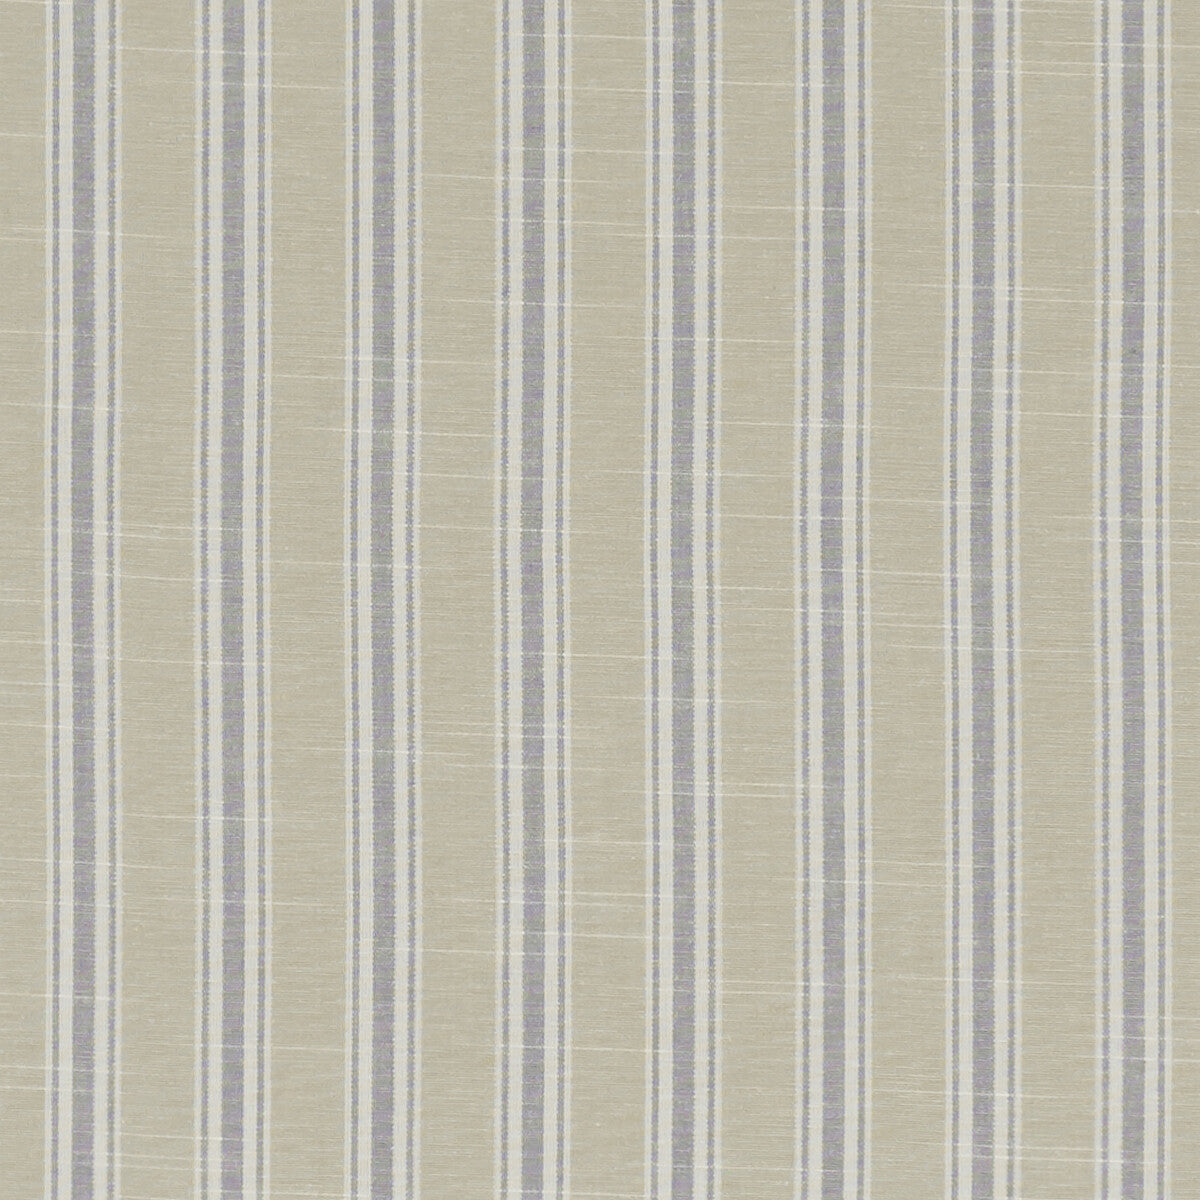 Thornwick fabric in mineral color - pattern F1311/06.CAC.0 - by Clarke And Clarke in the Bempton By Studio G For C&amp;C collection